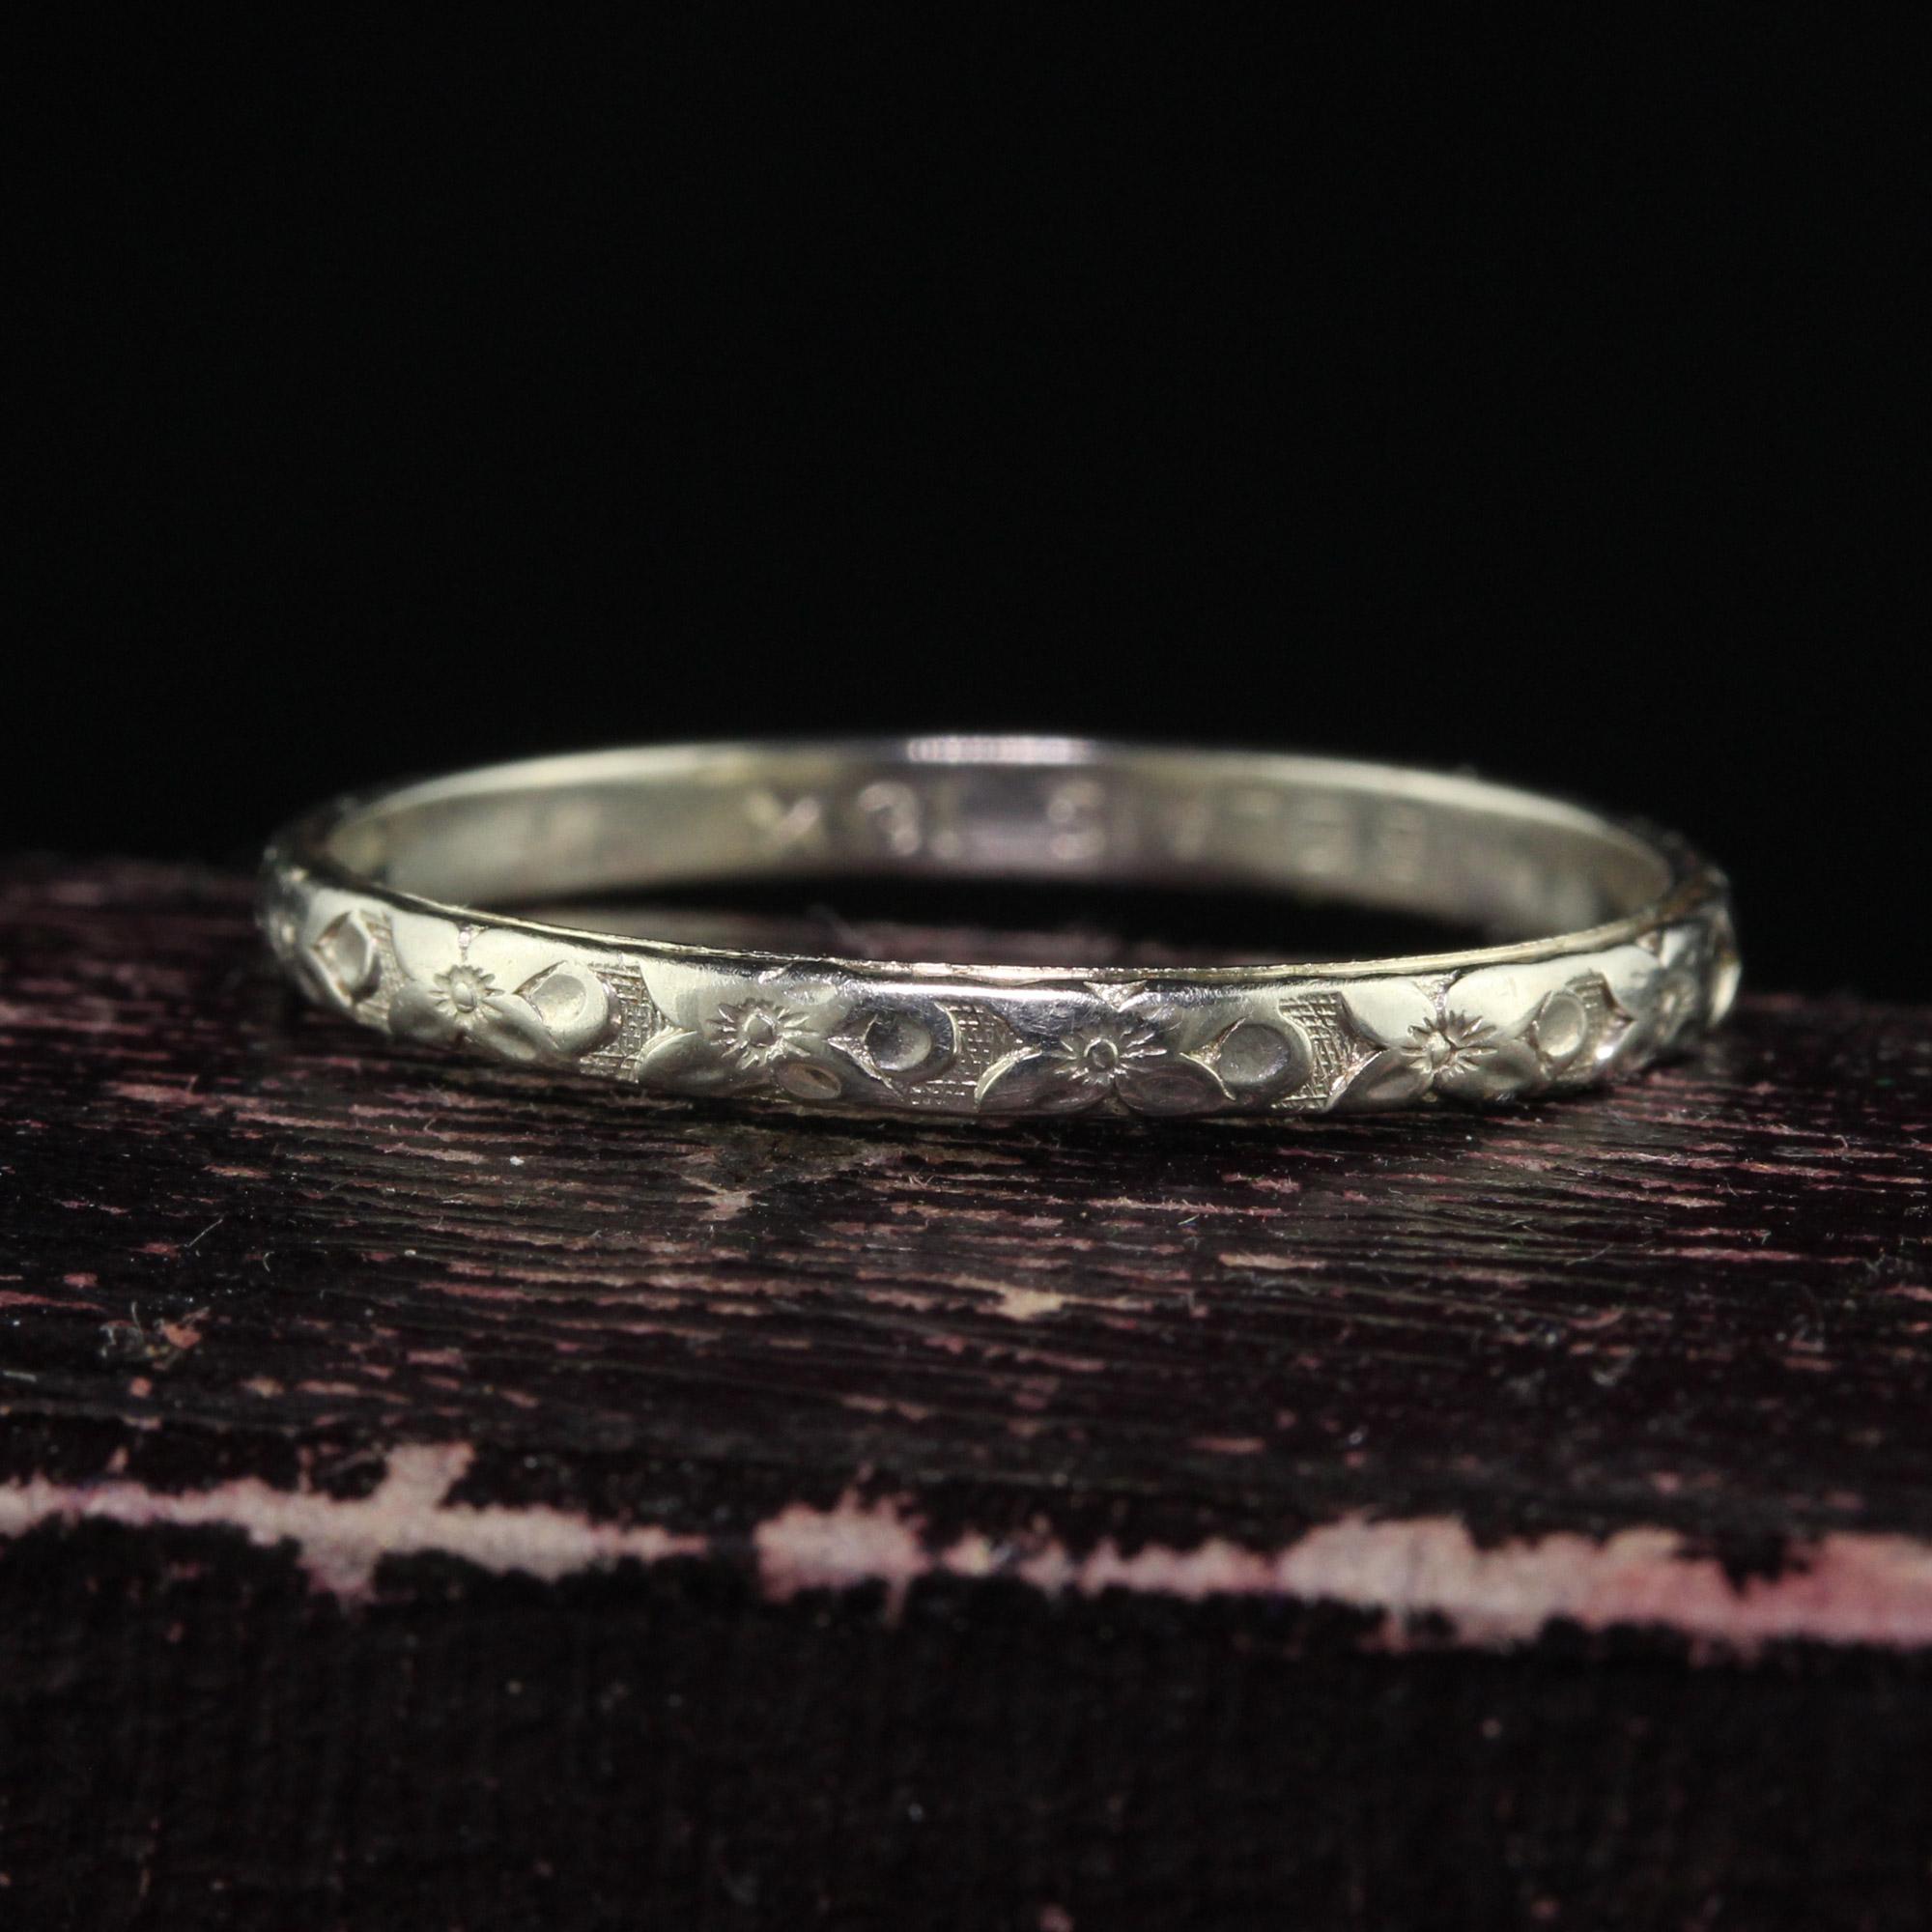 Beautiful Antique Art Deco Belais 18K White Gold Blossom Engraved Wedding Band - Size 8 1/4. This beautiful wedding band is crafted in 18k white gold. The ring has blossom engravings going around the entire ring. The ring sits low on the finger and